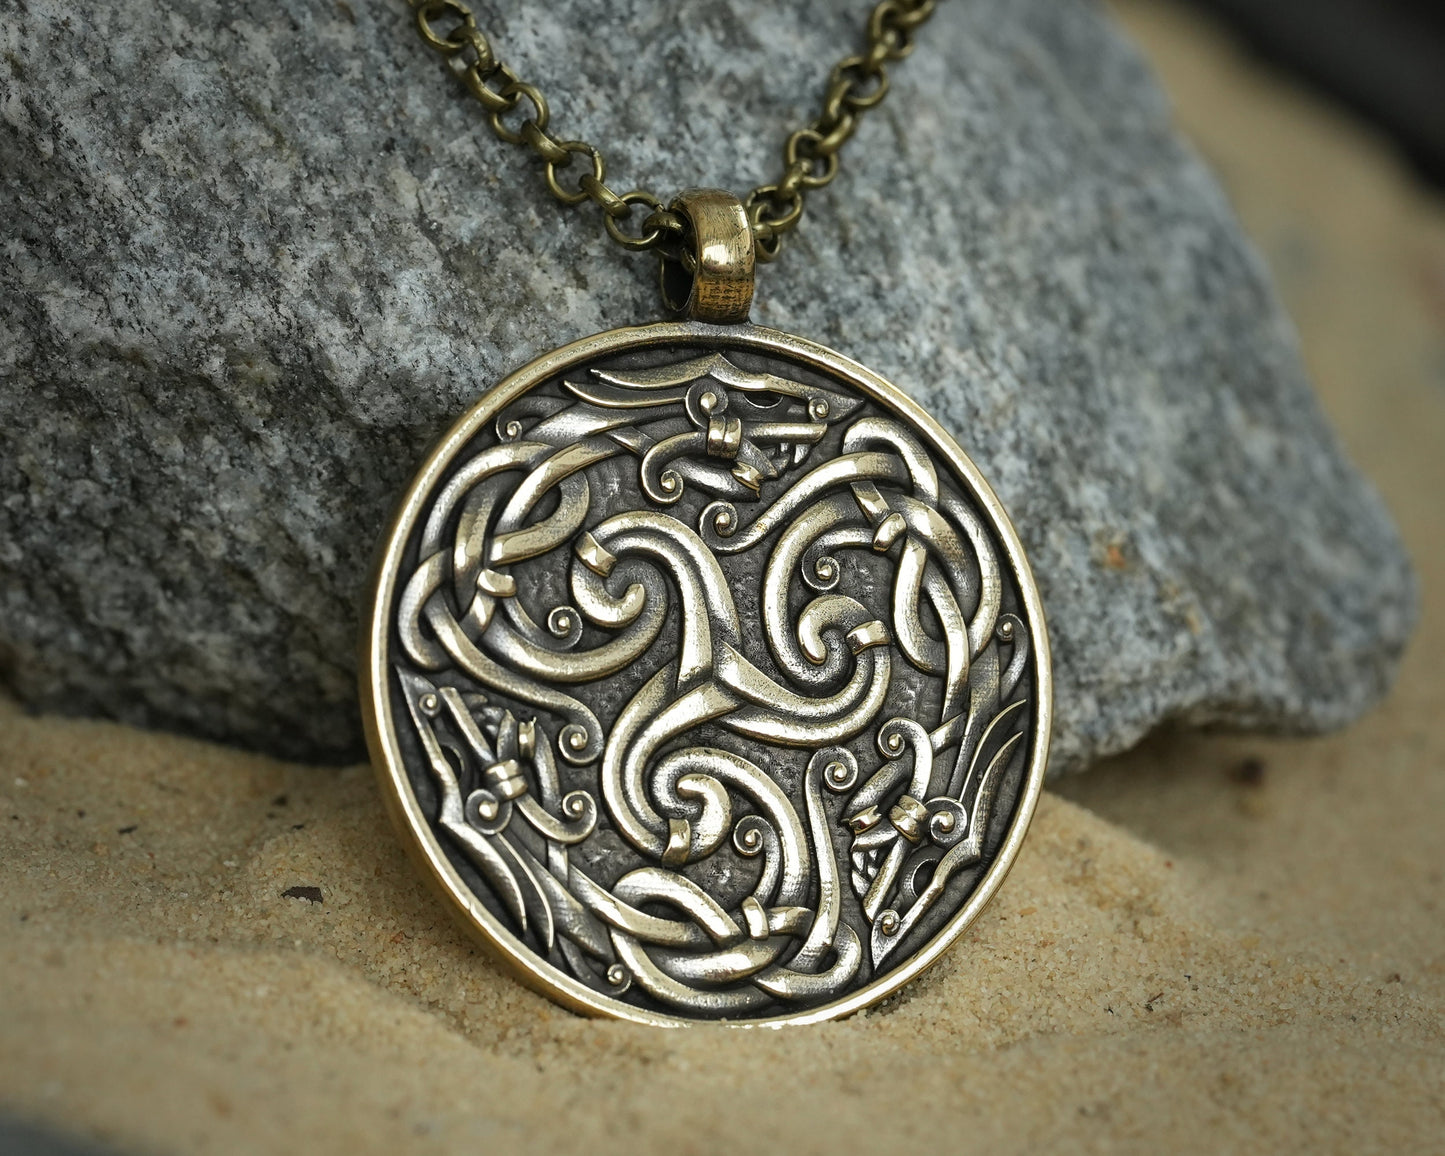 Viking Celtic Dragon Triskelion Infinity Endless Cycle Triskele Mens Necklace Pendant Charm Jewelry With Chain - Baldur Jewelry